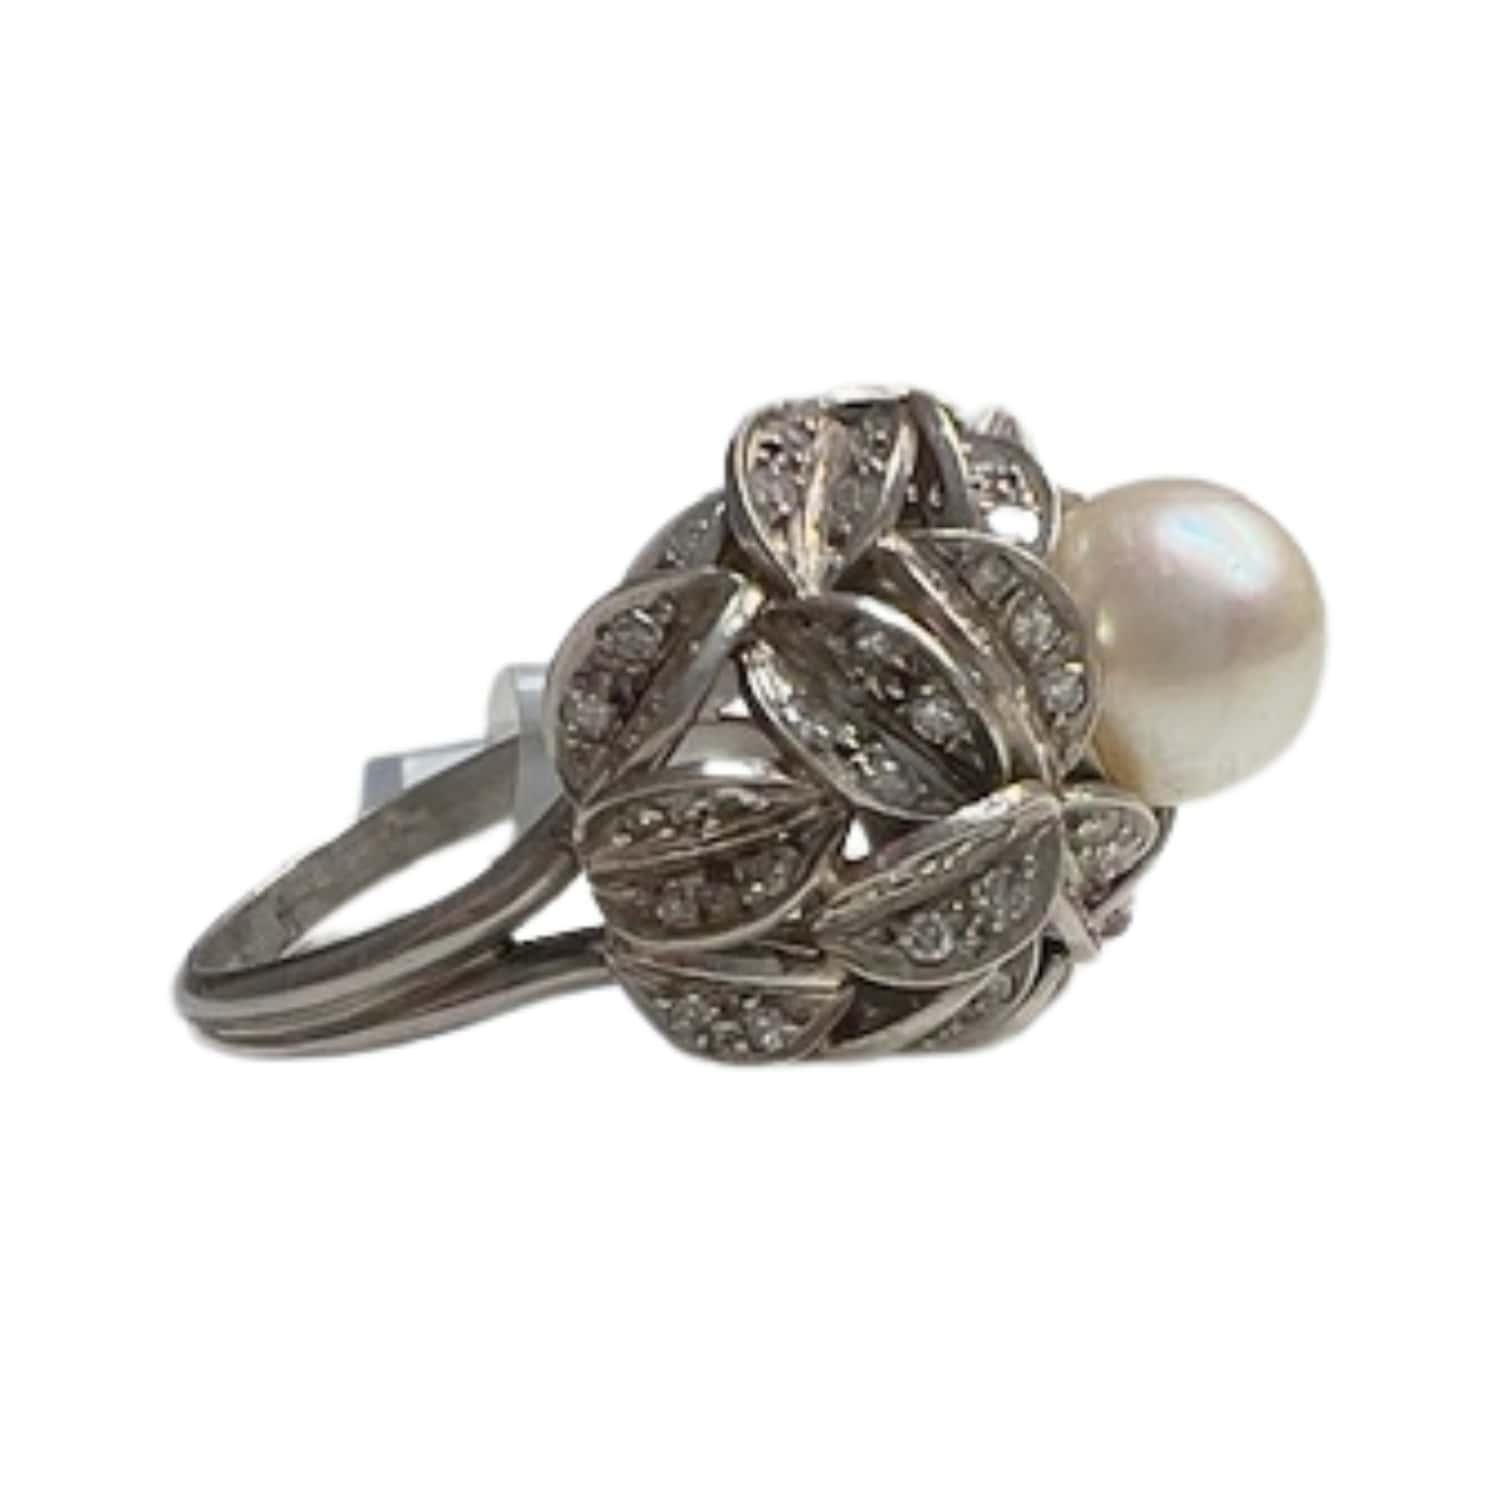 This stunning ring exudes retro charm with its design from 1945. Crafted in platinum 950 kts, it features exquisite diamonds and a lustrous pearl. The single-cut diamonds total 1.44 carats with VS-SI clarity and I-H color, adding timeless